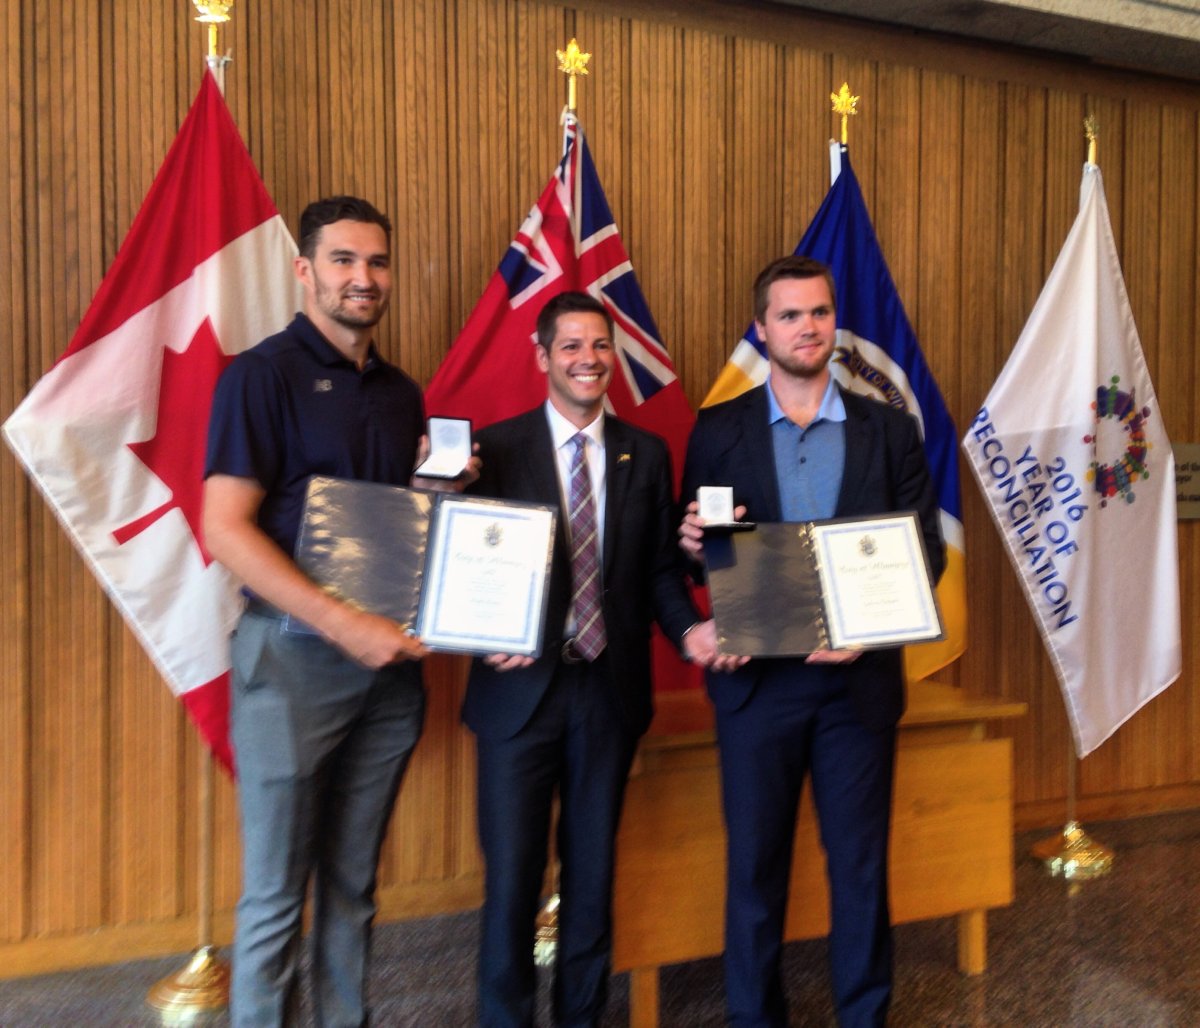 Mark Stone (left) and Calvin Pickard (right) post with Mayor Brian Bowman, after receiving their sports excellence awards .